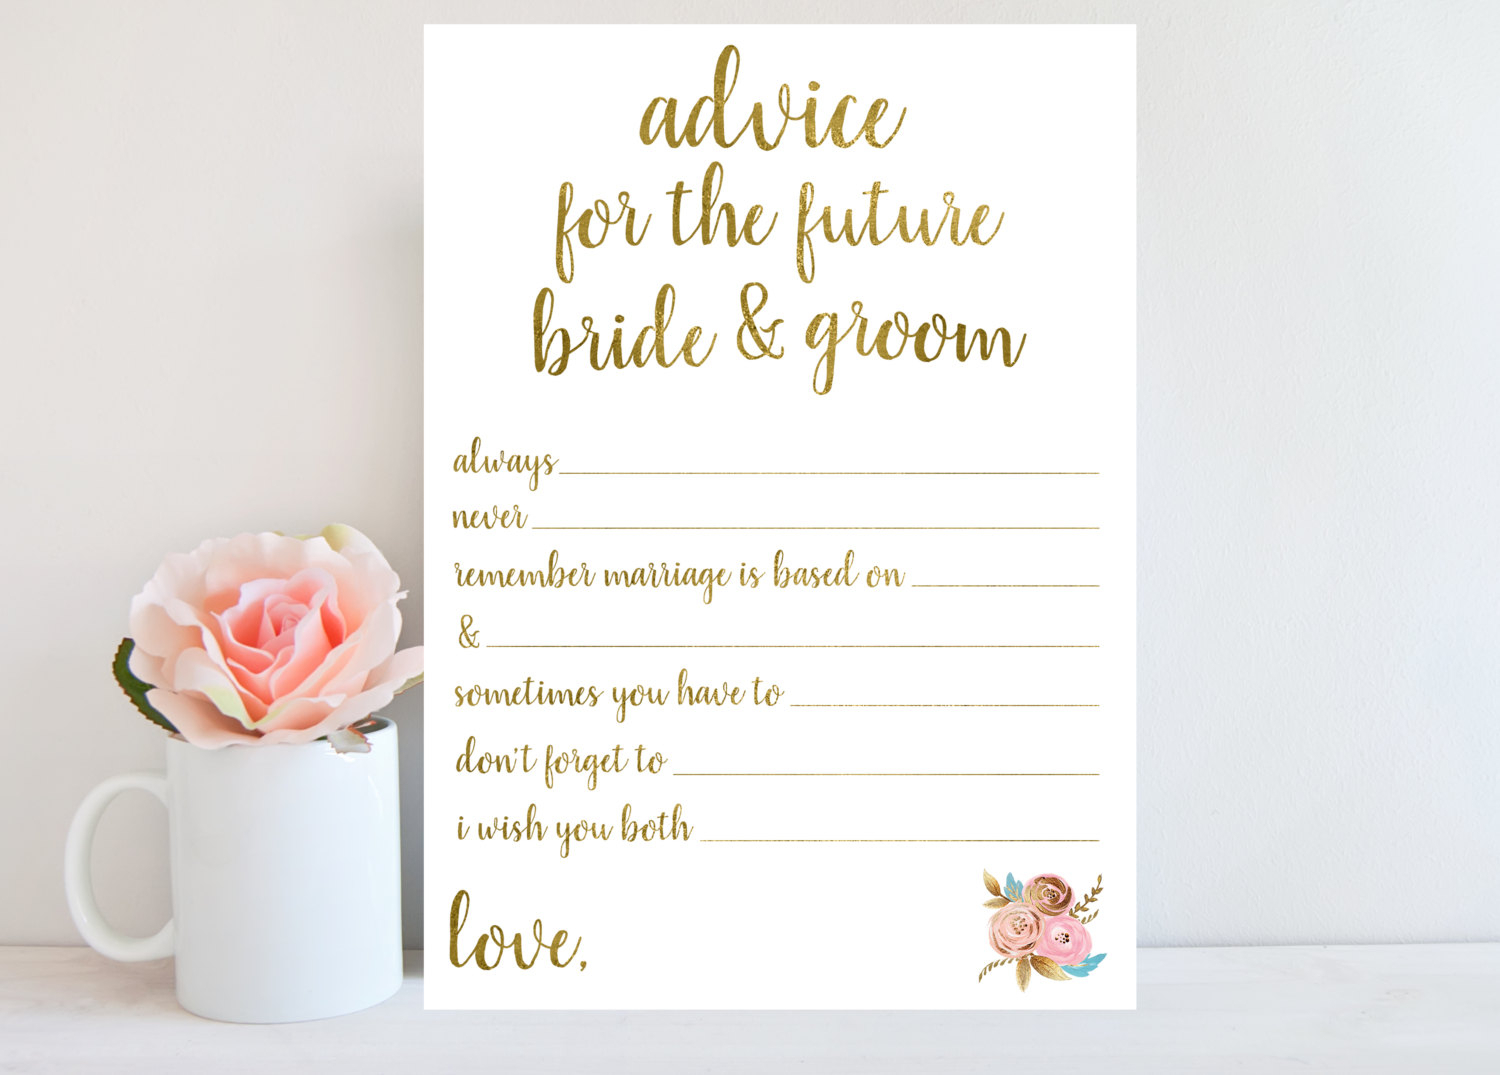 Wedding Mad Libs Wedding Advice Card Fill In The Blank Intended For Marriage Advice Cards Templates